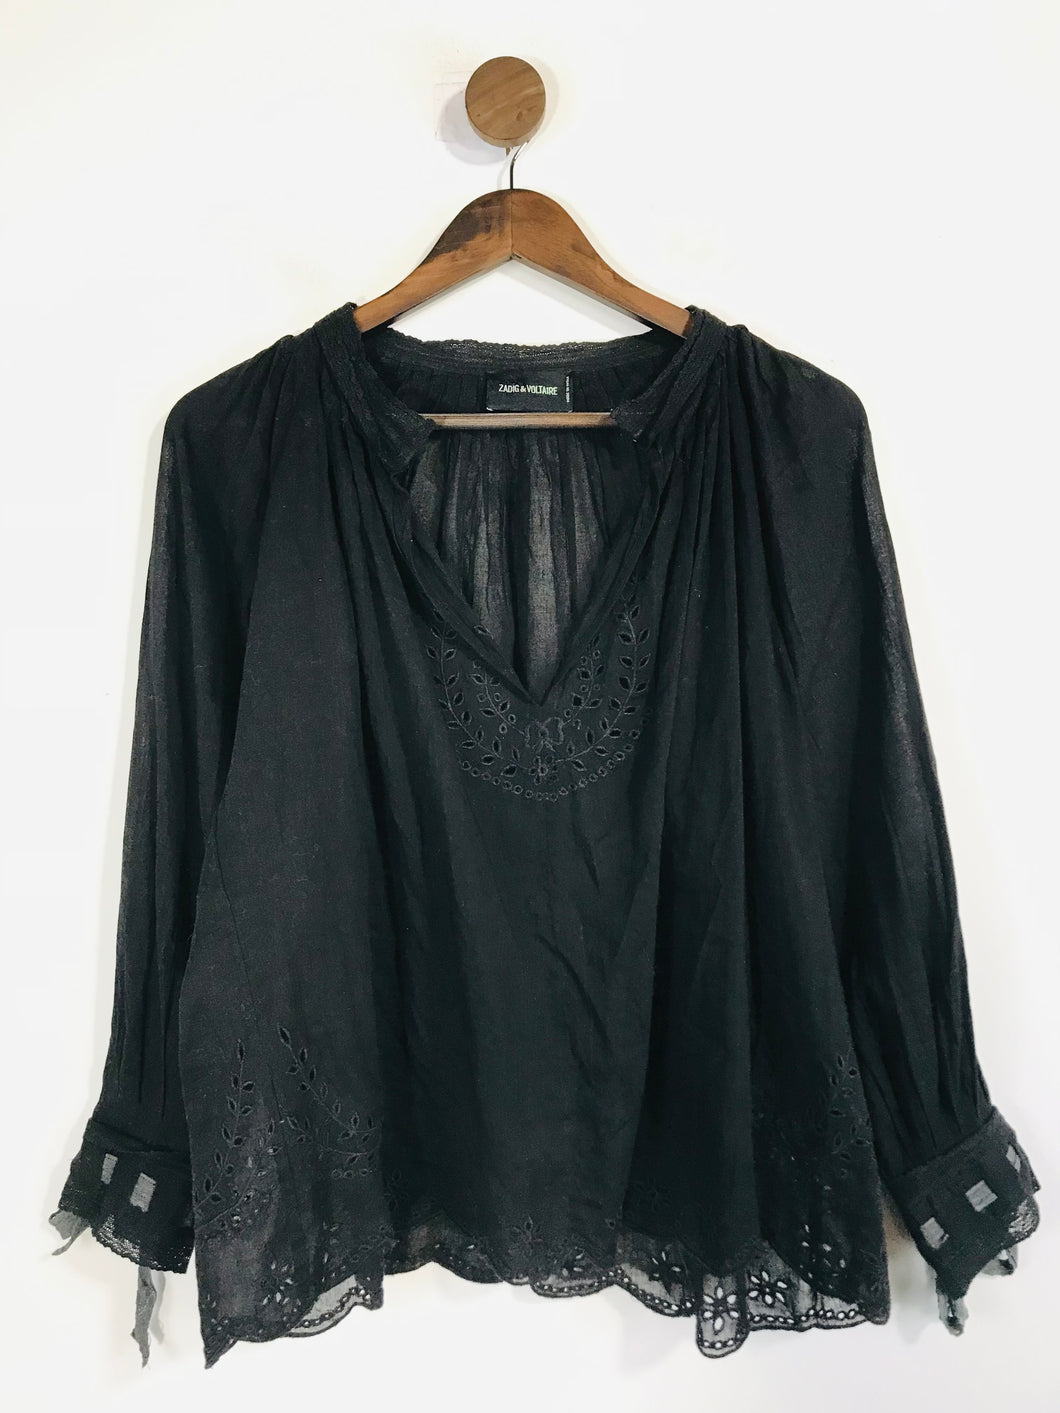 Zadig & Voltaire Women's Boho Embroidered Blouse | S UK8 | Black